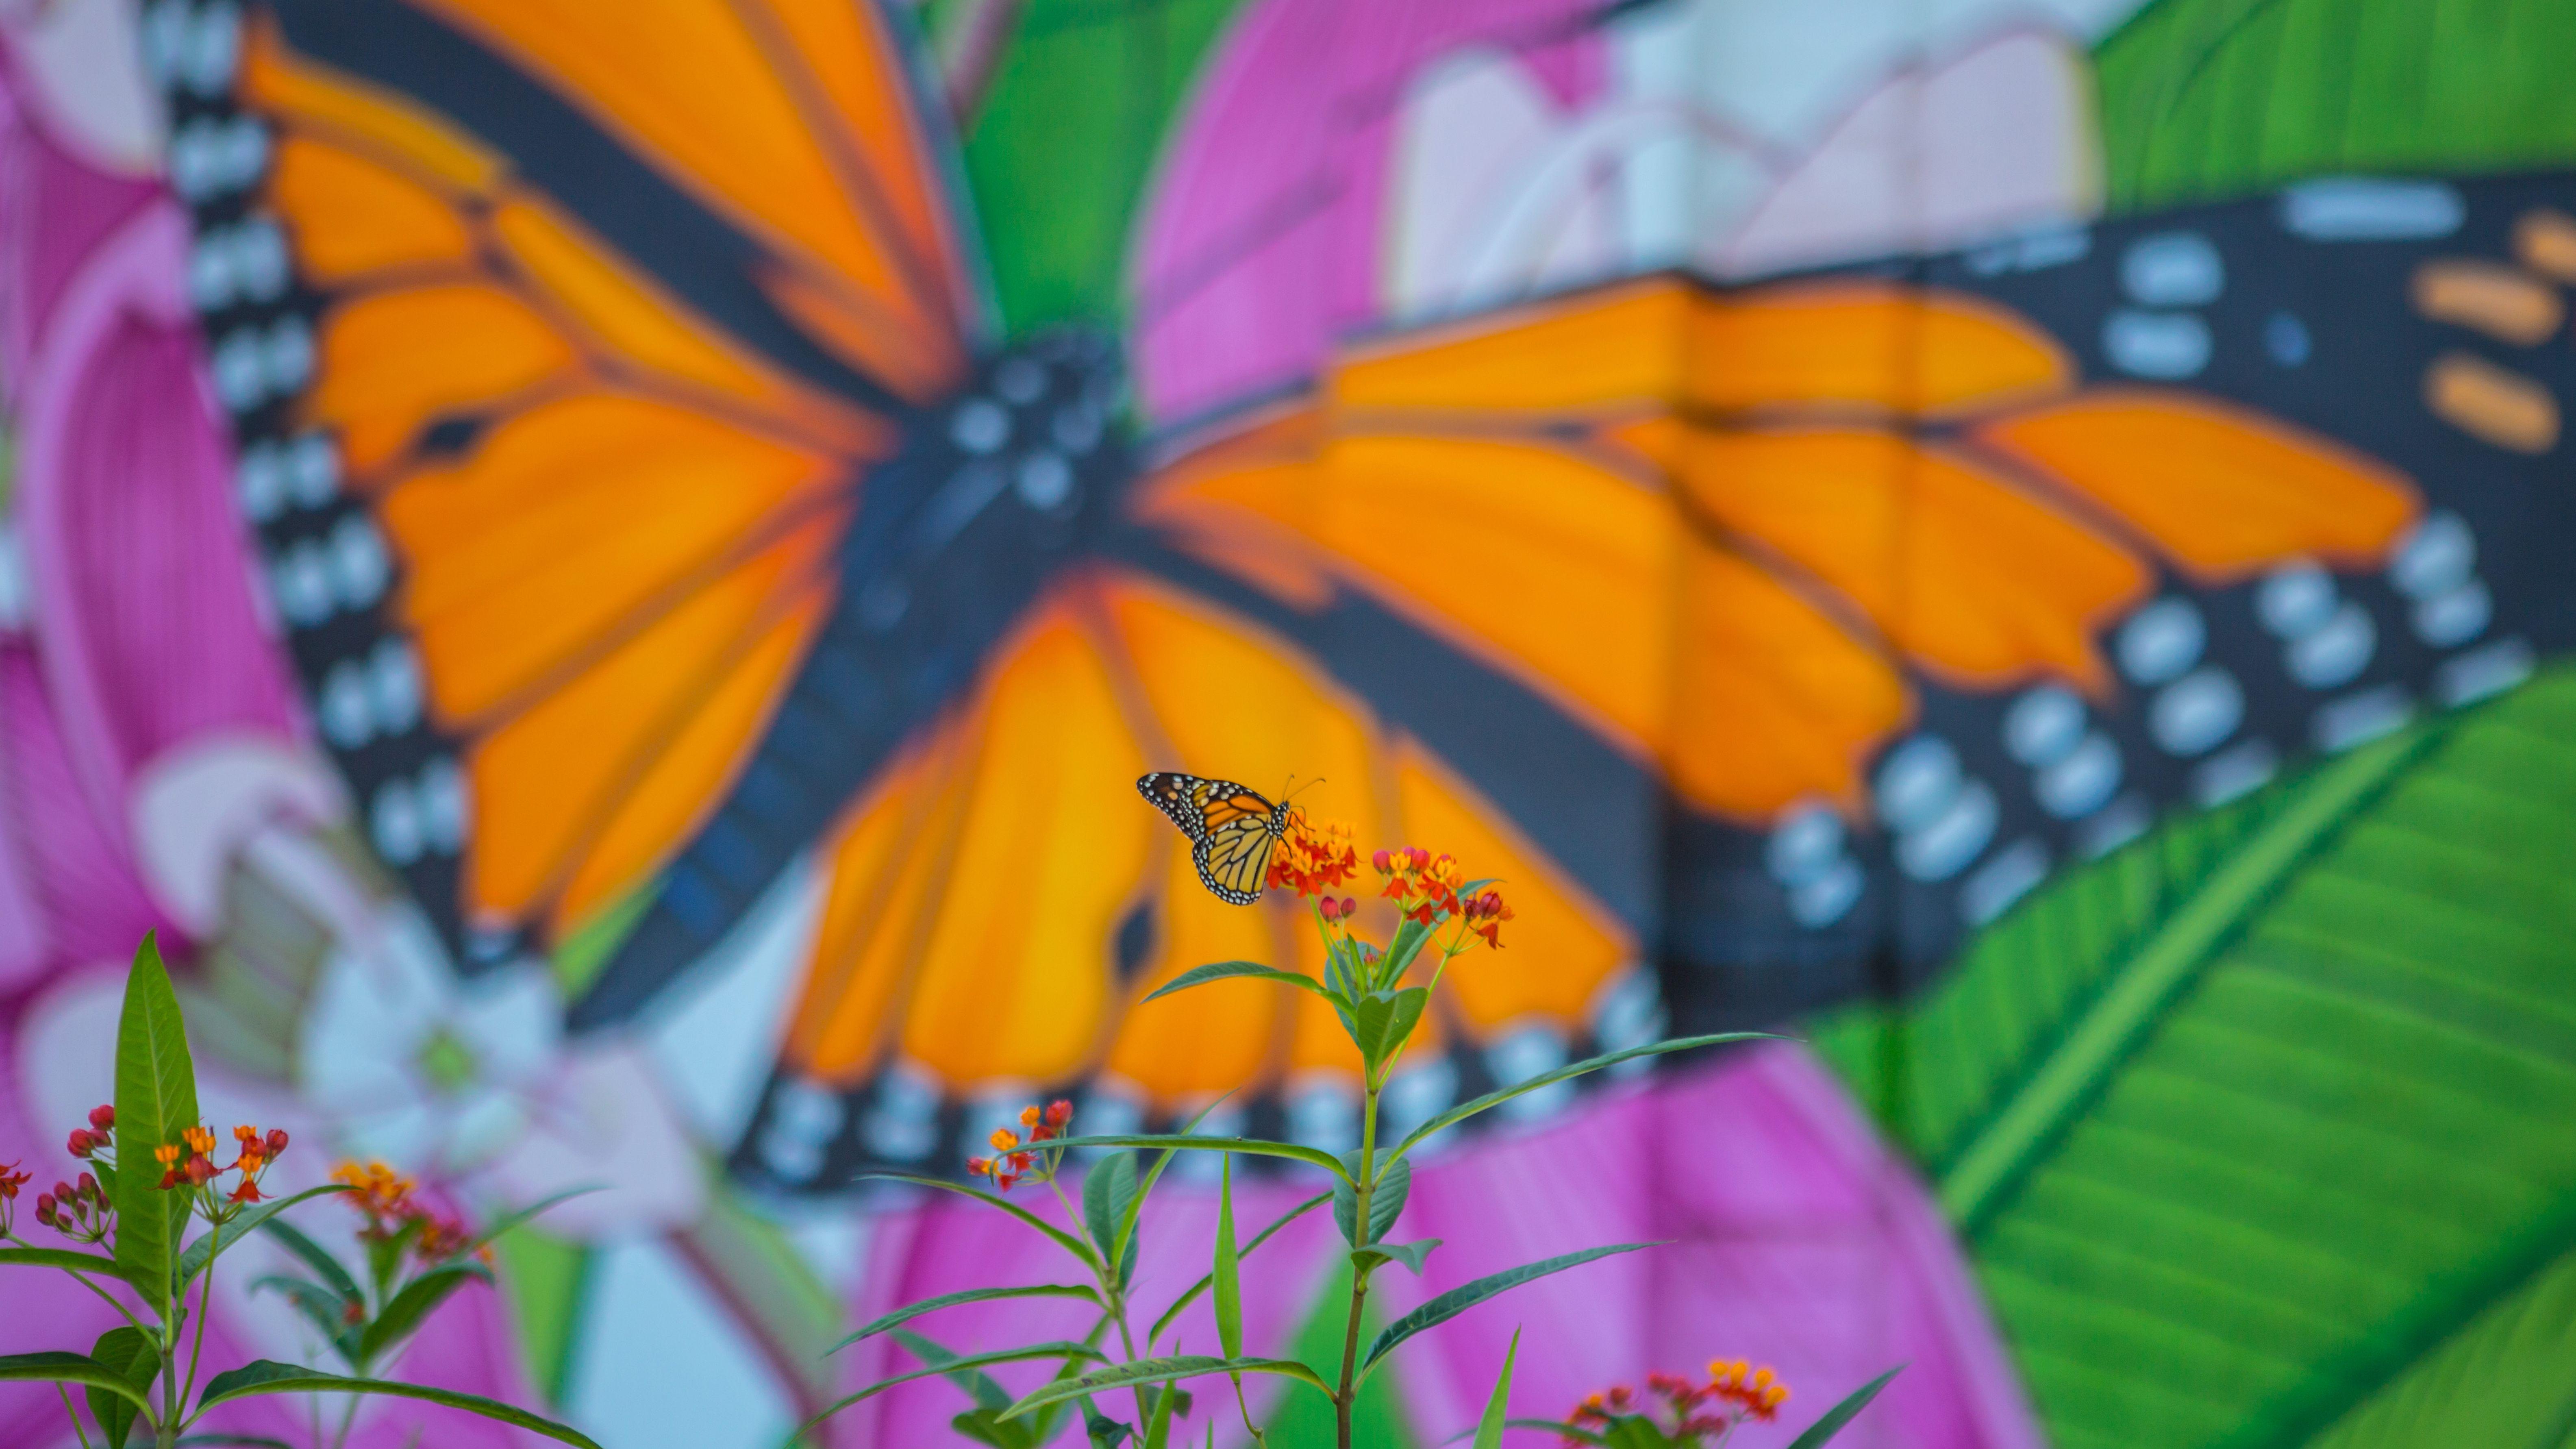 The Nature Conservancy Alongside Lead Collaborator Full Sail University Launch “The Monarch Initiative” - Hero image 